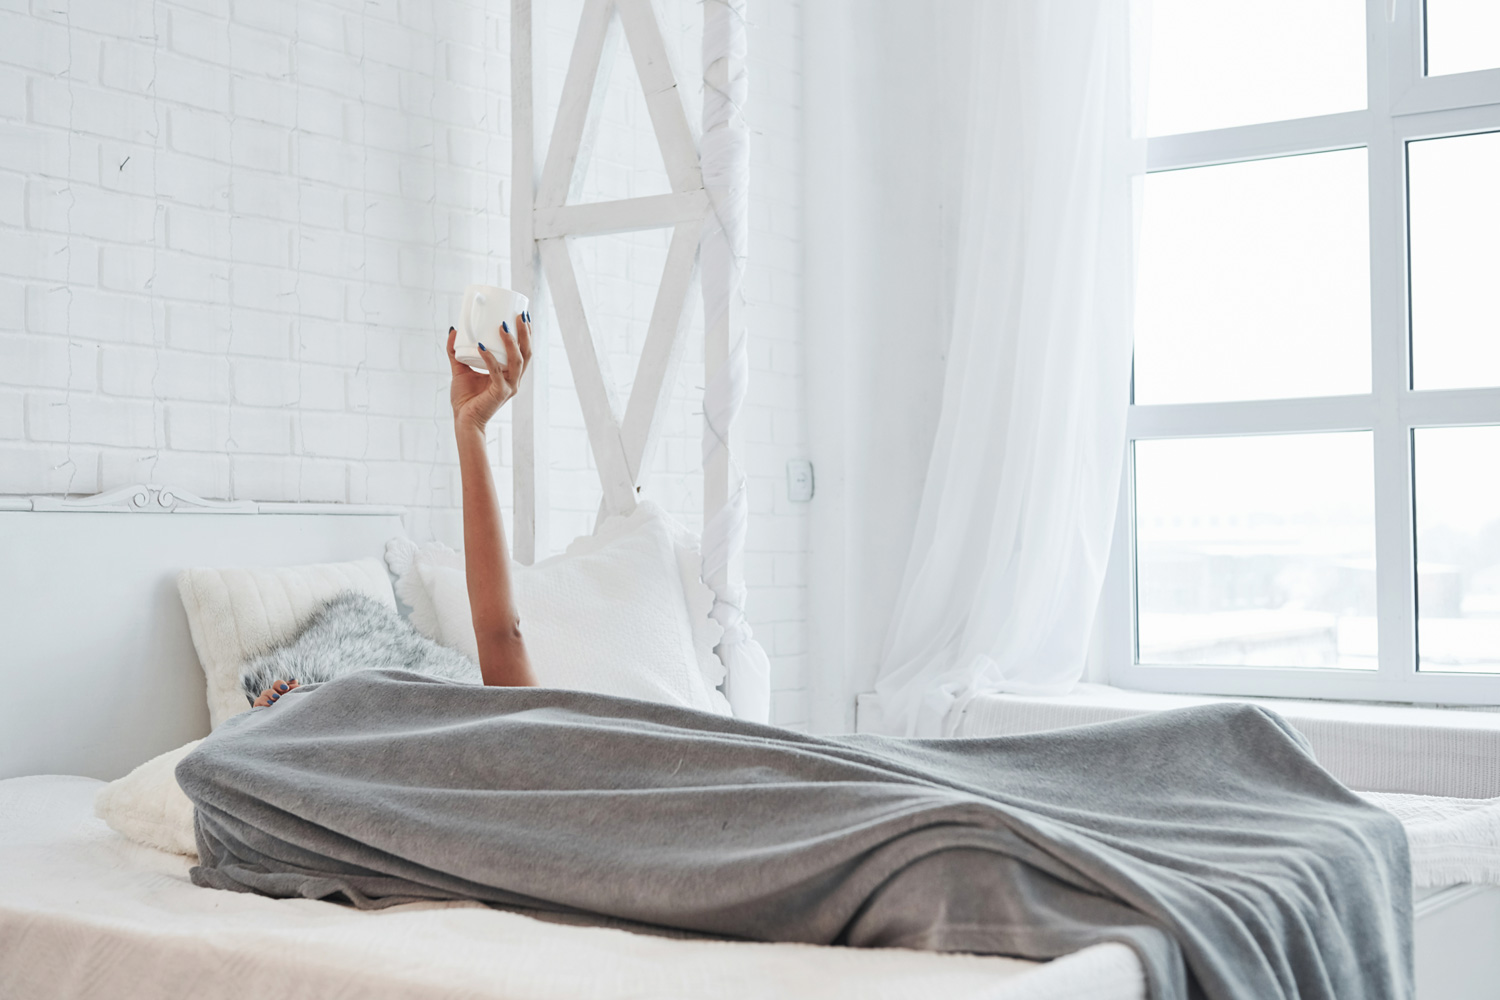 Woman lying under blanket and raising hand up with white cup of coffee in it.